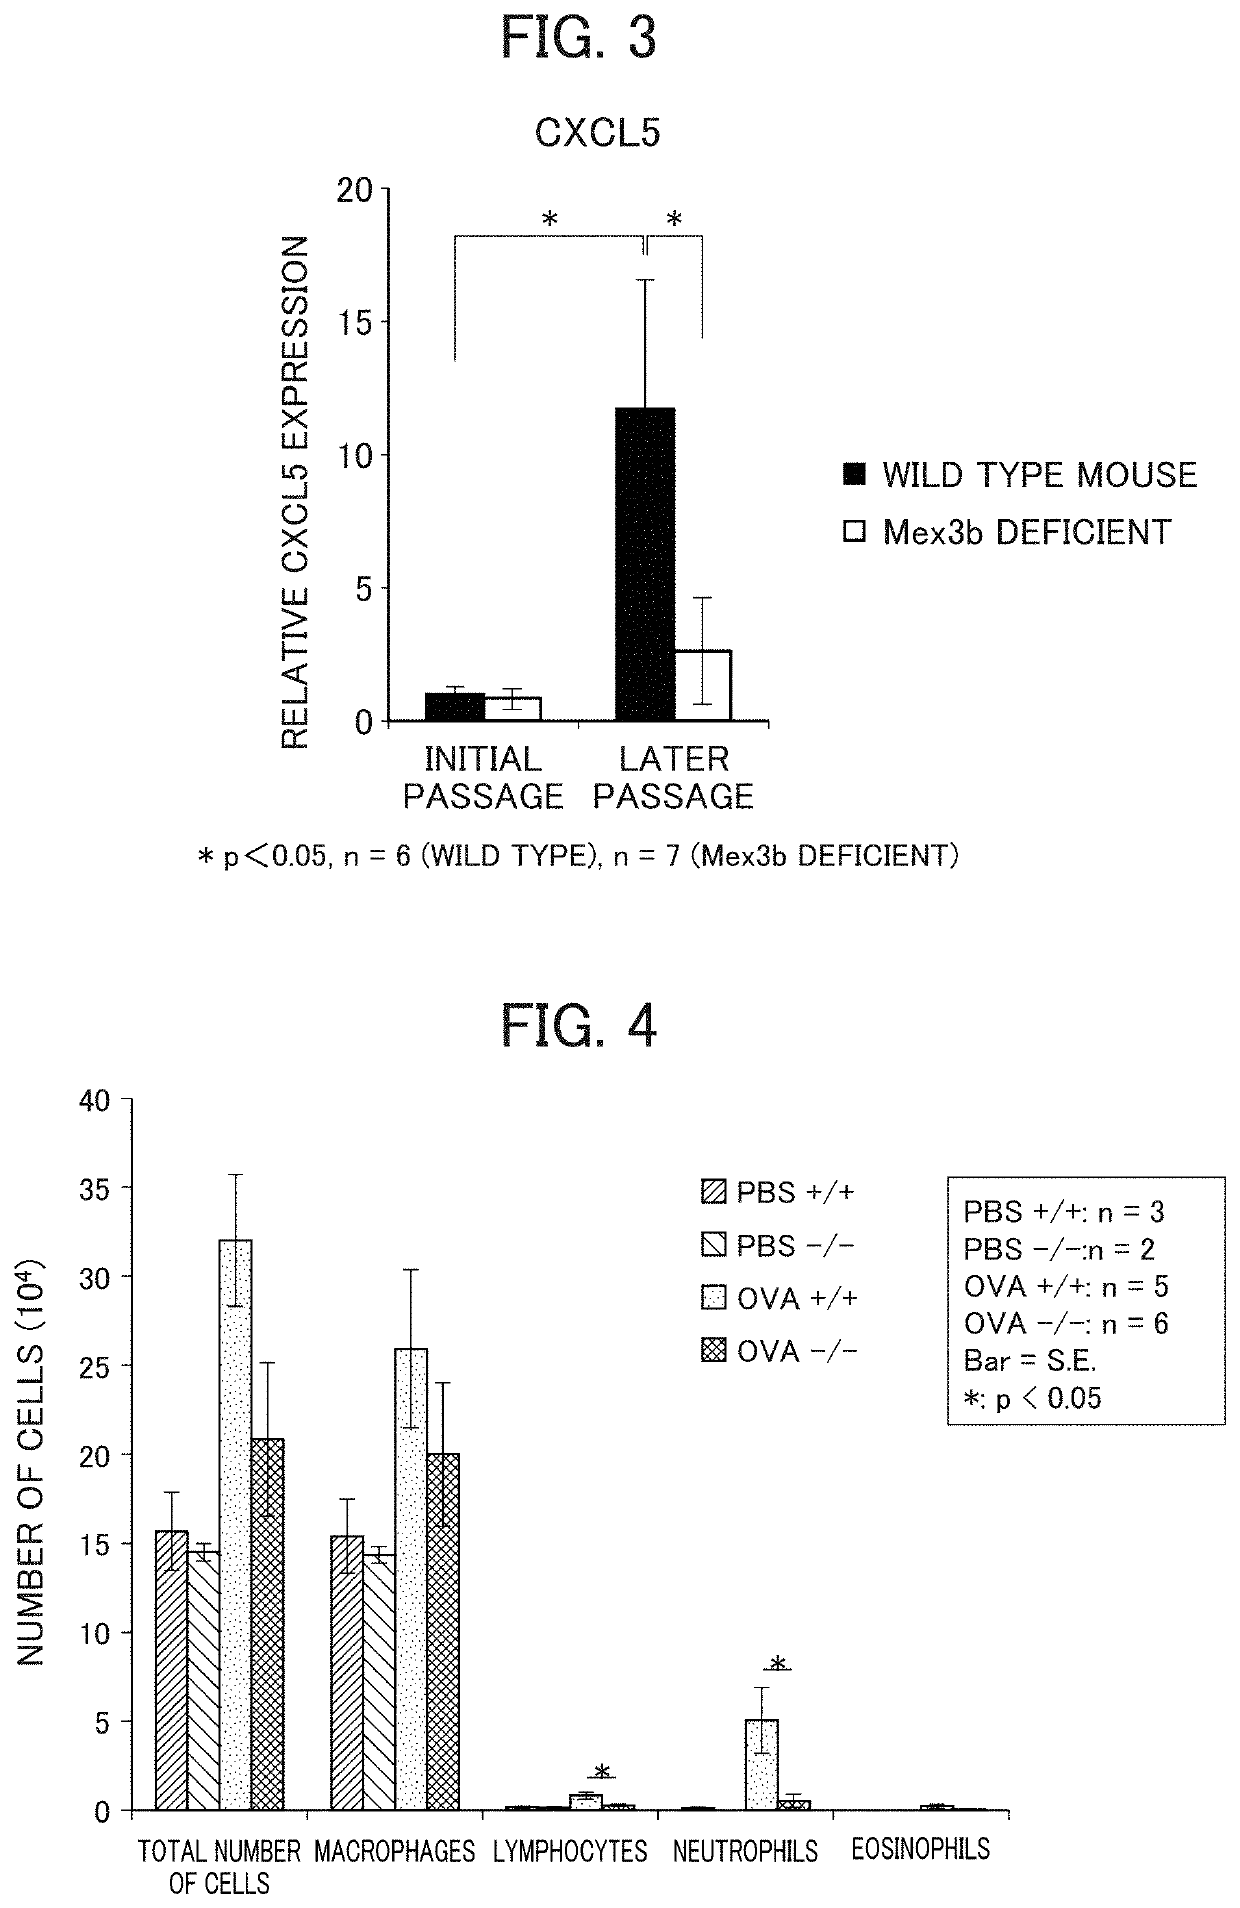 Method for screening prophylactic or therapeutic agents for diseases caused by interleukin 6, interleukin 13, TNF, G-CSF, CXCL1, CXCL2, or CXCL5 and agent for the prevention or treatment of diseases caused by interleukin 6, interleukin 13, TNF, G-CSF, CXCL1, CXCL2, or CXCL5